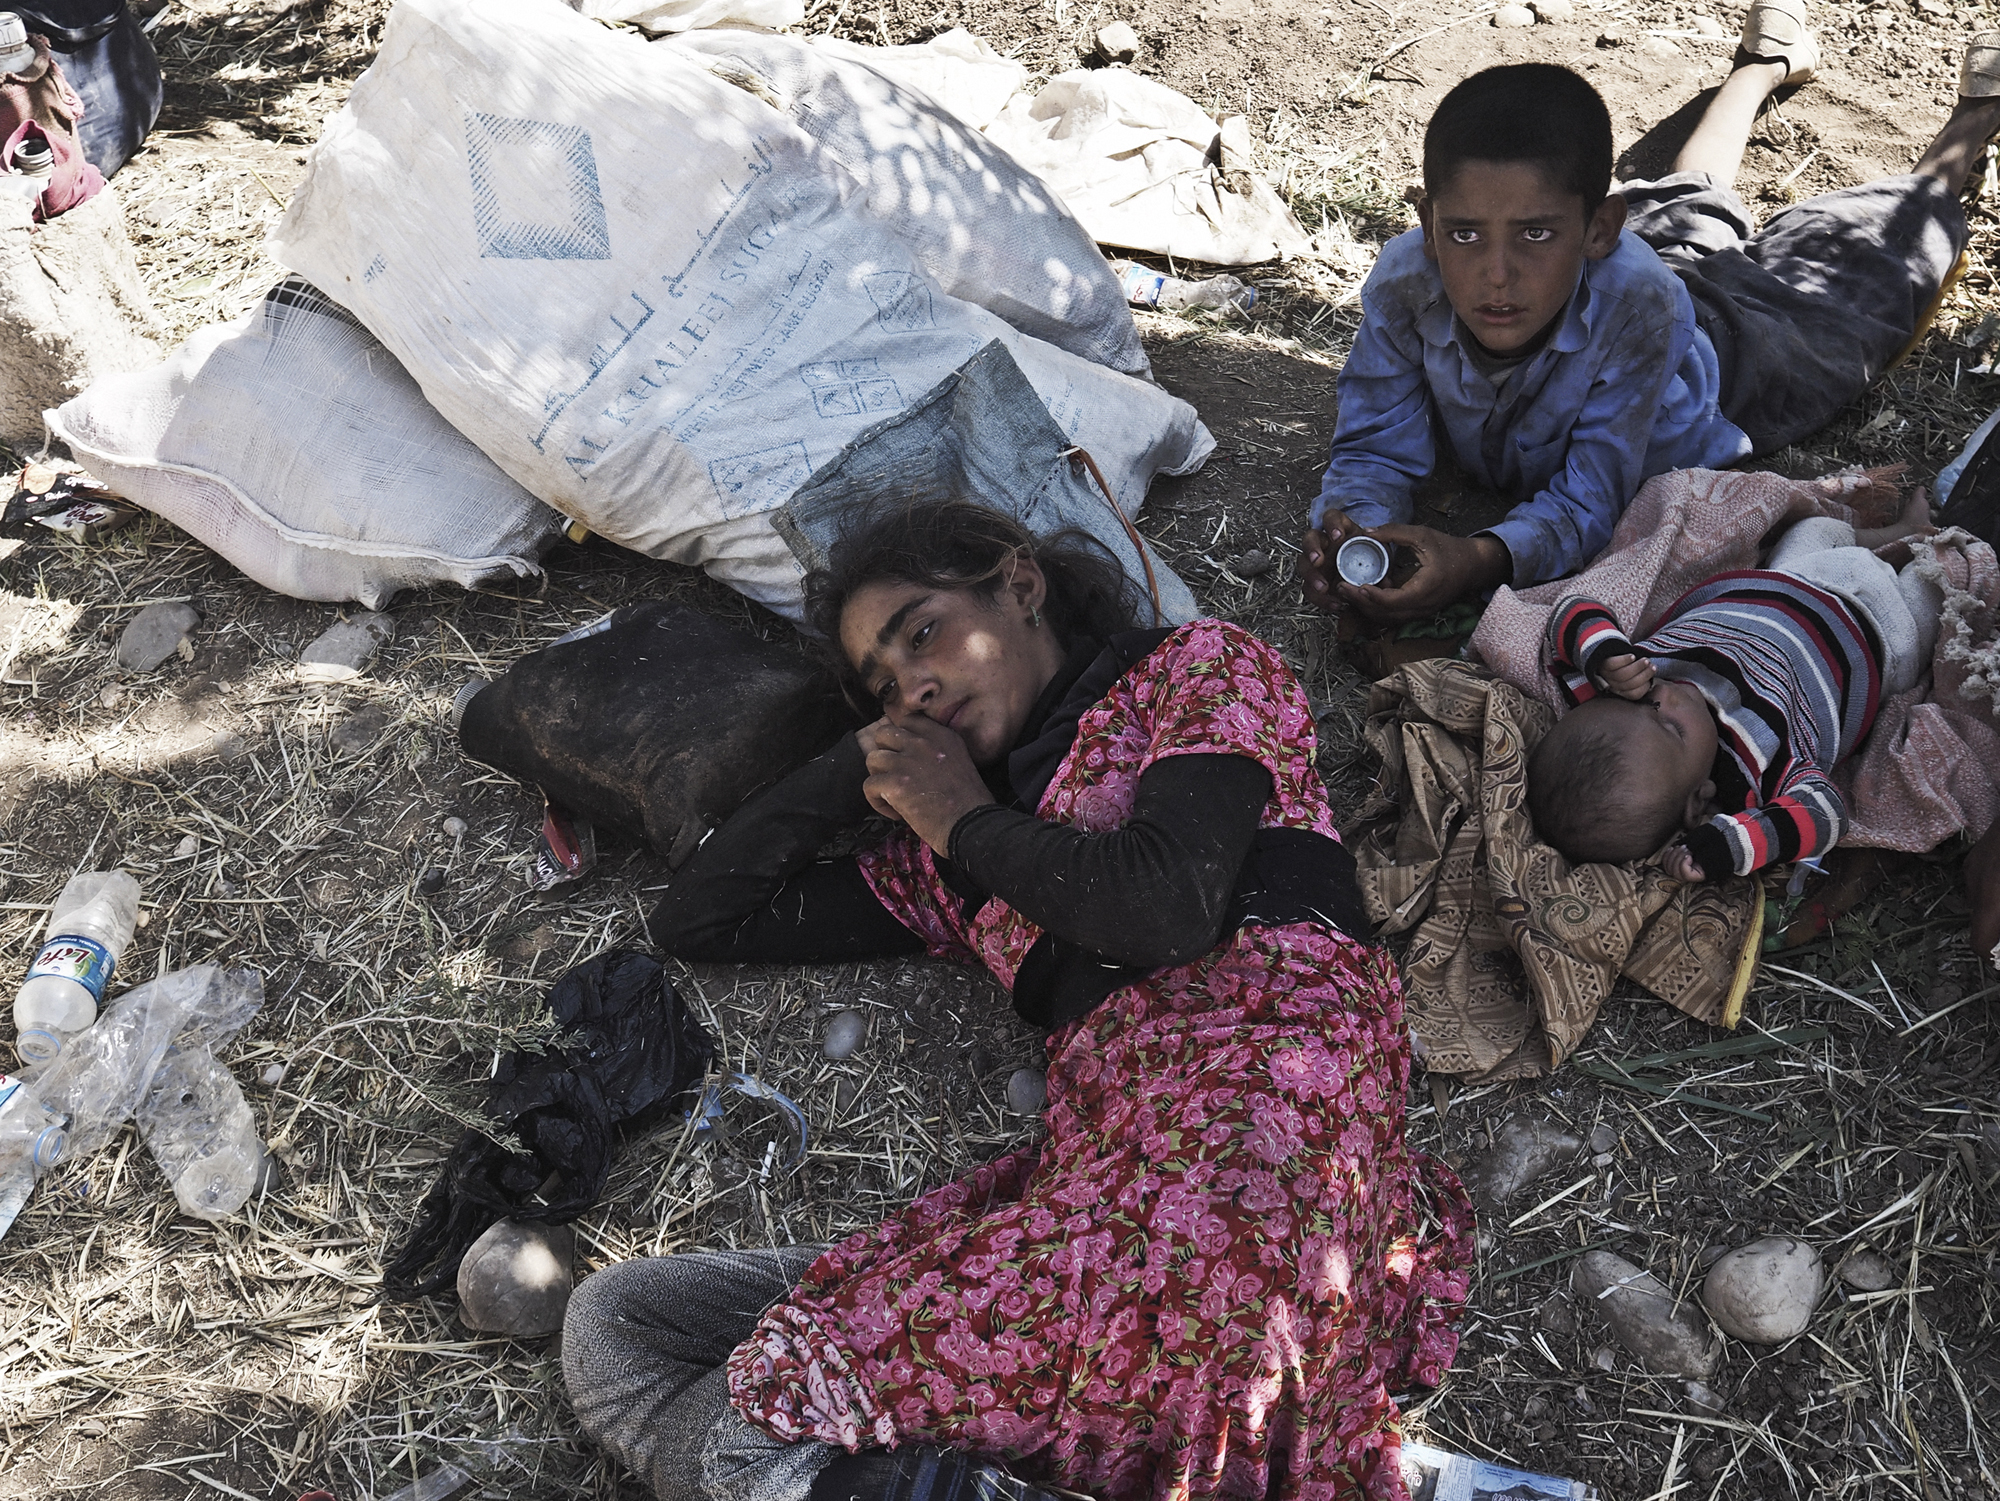 14-year-old Tawaf Ismail, a Yazidi girl from Sinjar, rests next to her brothers after arriving at the Fishkhabur border crossing between Iraq's Dohuk Province and Syria, Aug. 10, 2014.